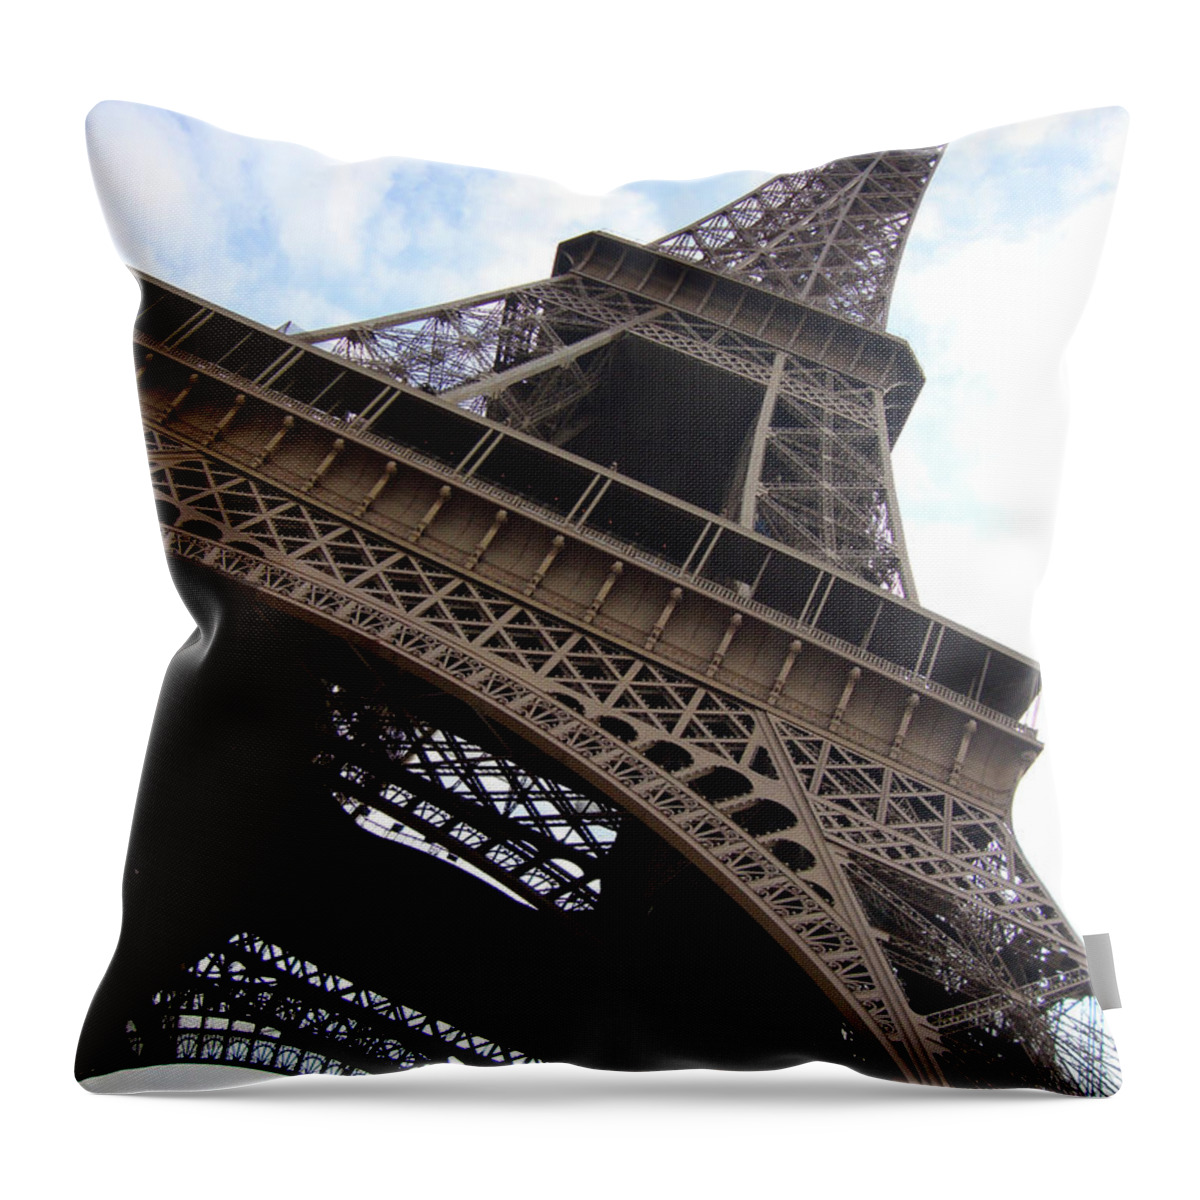 Eiffel Tower Throw Pillow featuring the photograph Eiffel Tower by Roxy Rich